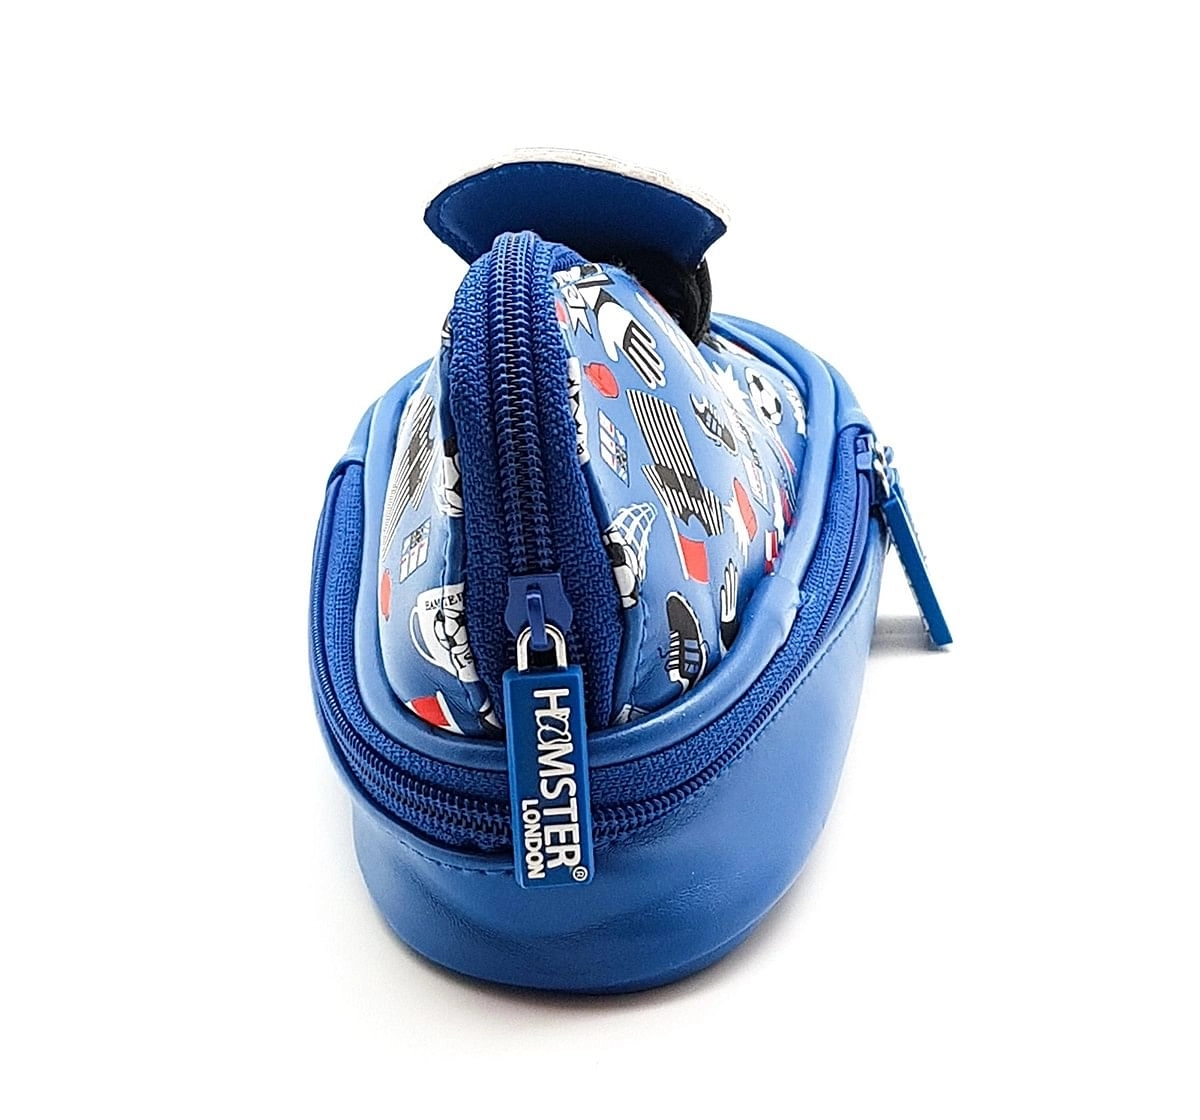 Hamster London Shoe Shaped Football Stationery Pouch for age 3Y+ (Blue)